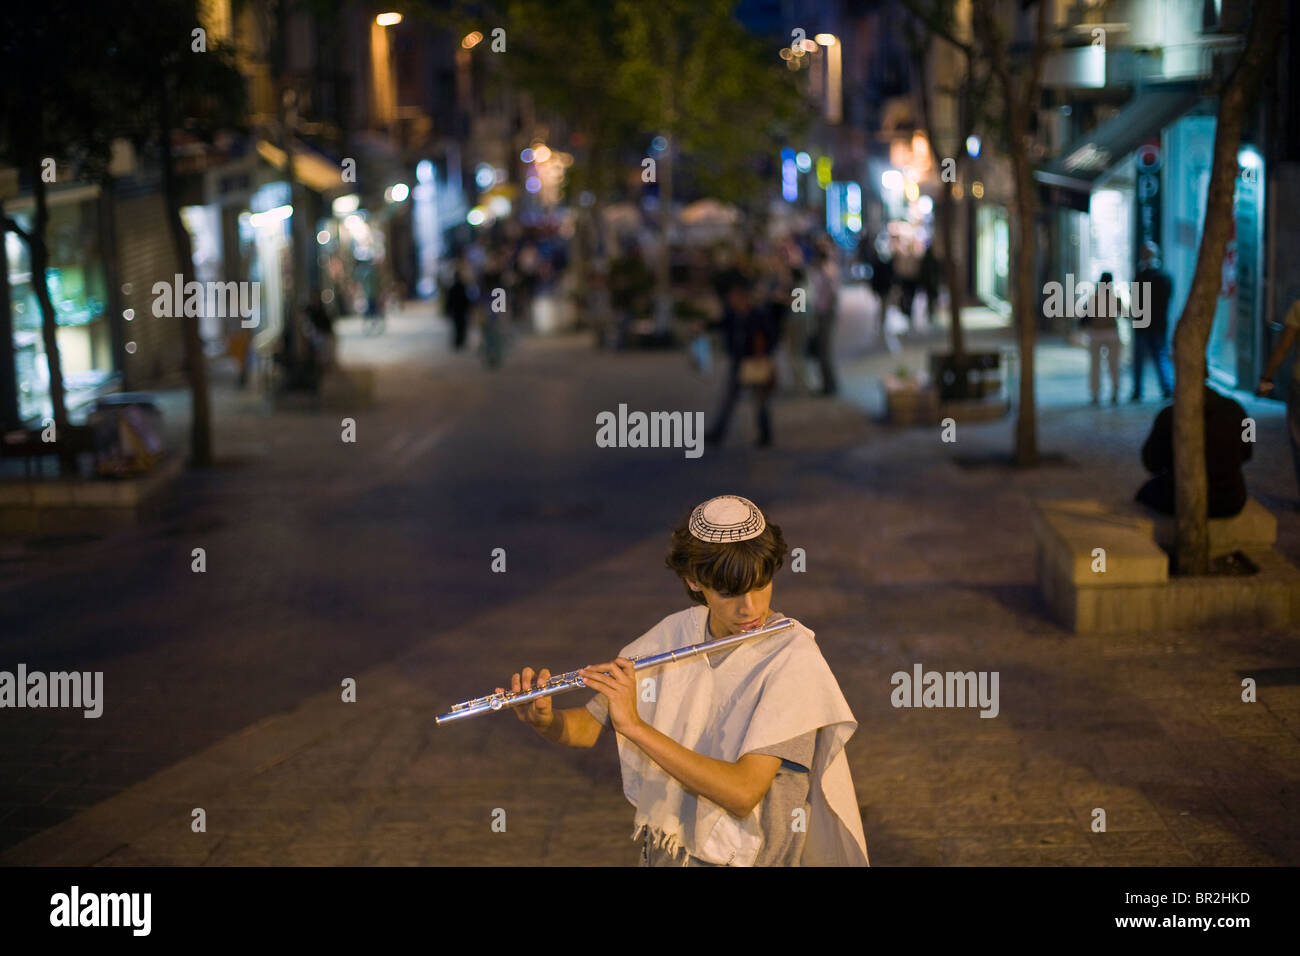 Boys dressed in traditional Israeli and Jewish clothes play the flute and mandolin on Ben Yahuda Street, Jerusalem, Israel Stock Photo